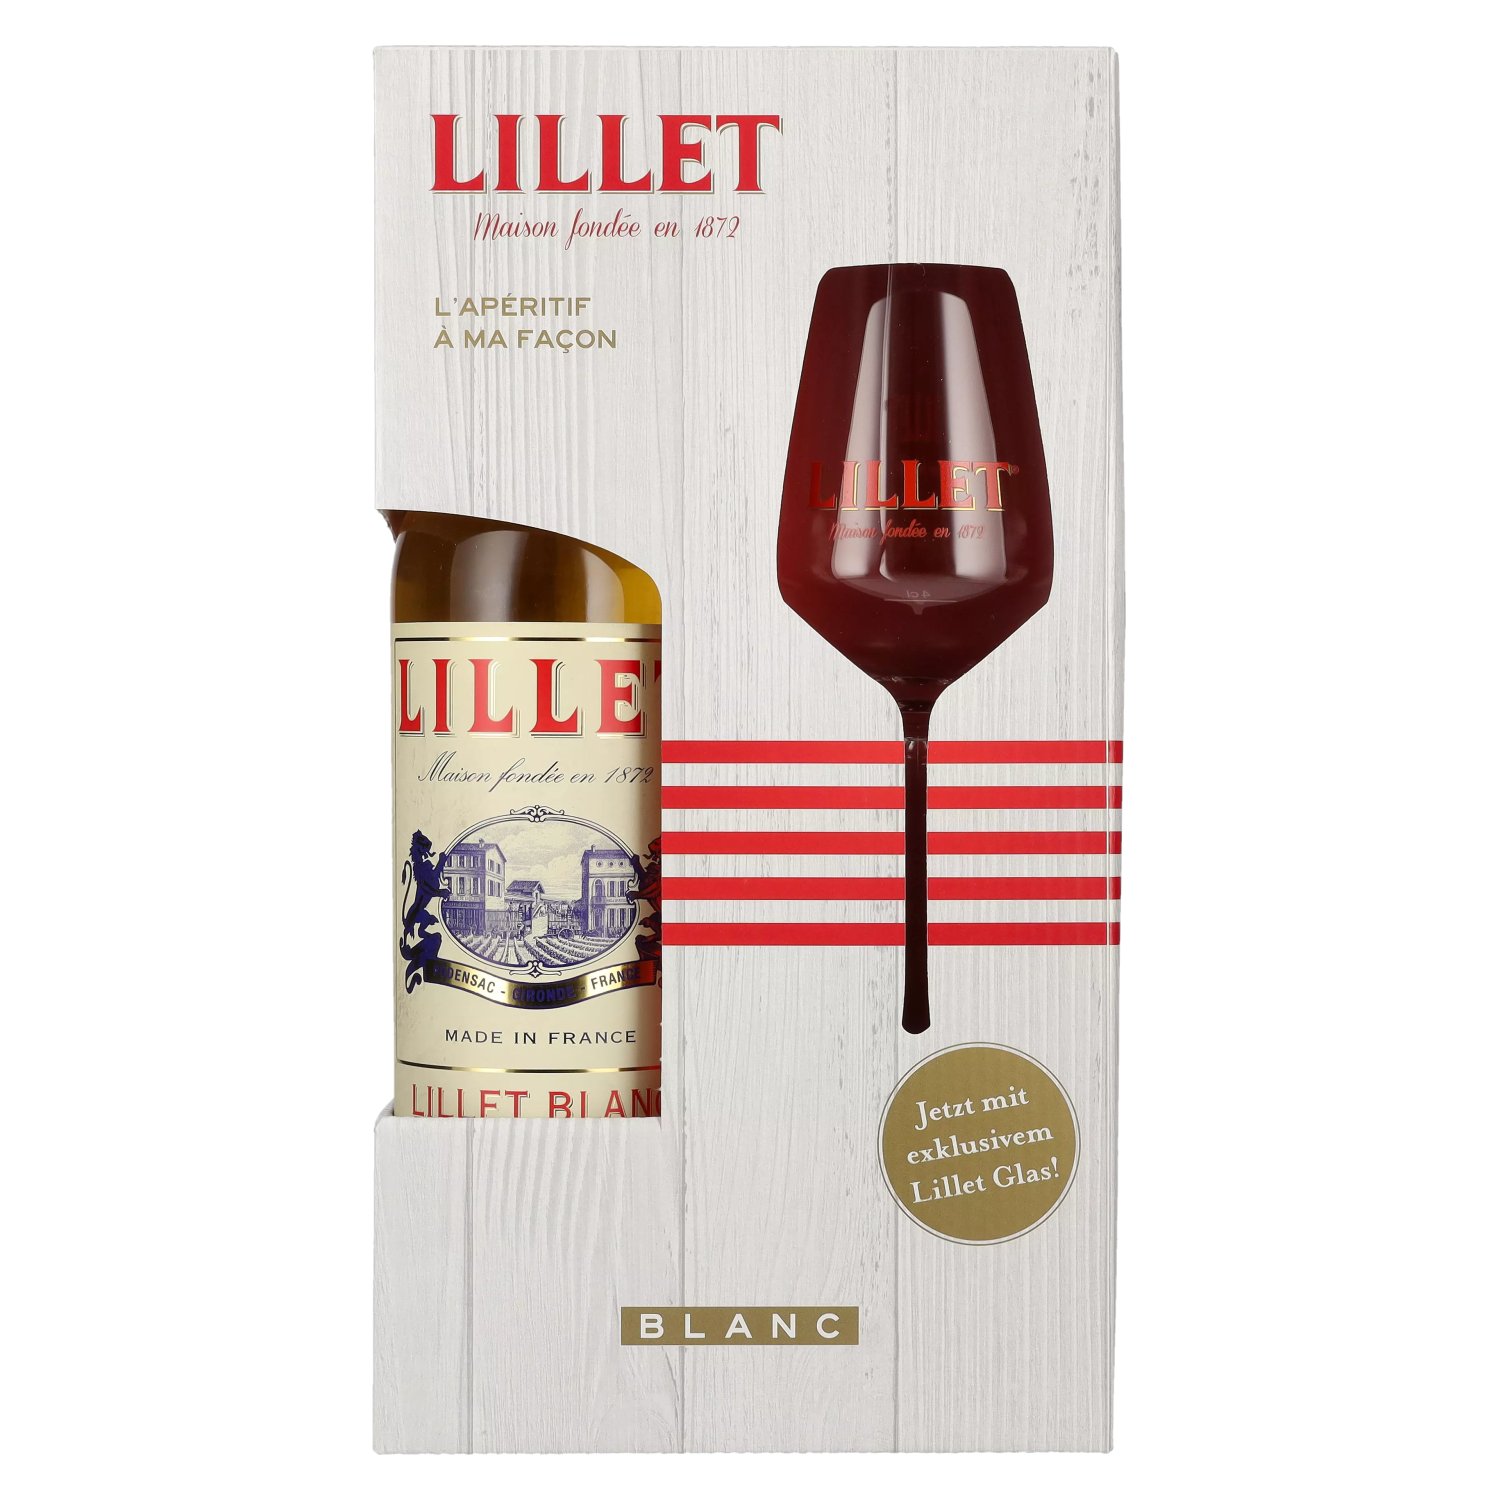 in Blanc 17% glass with 0,75l Lillet Giftbox Vol.